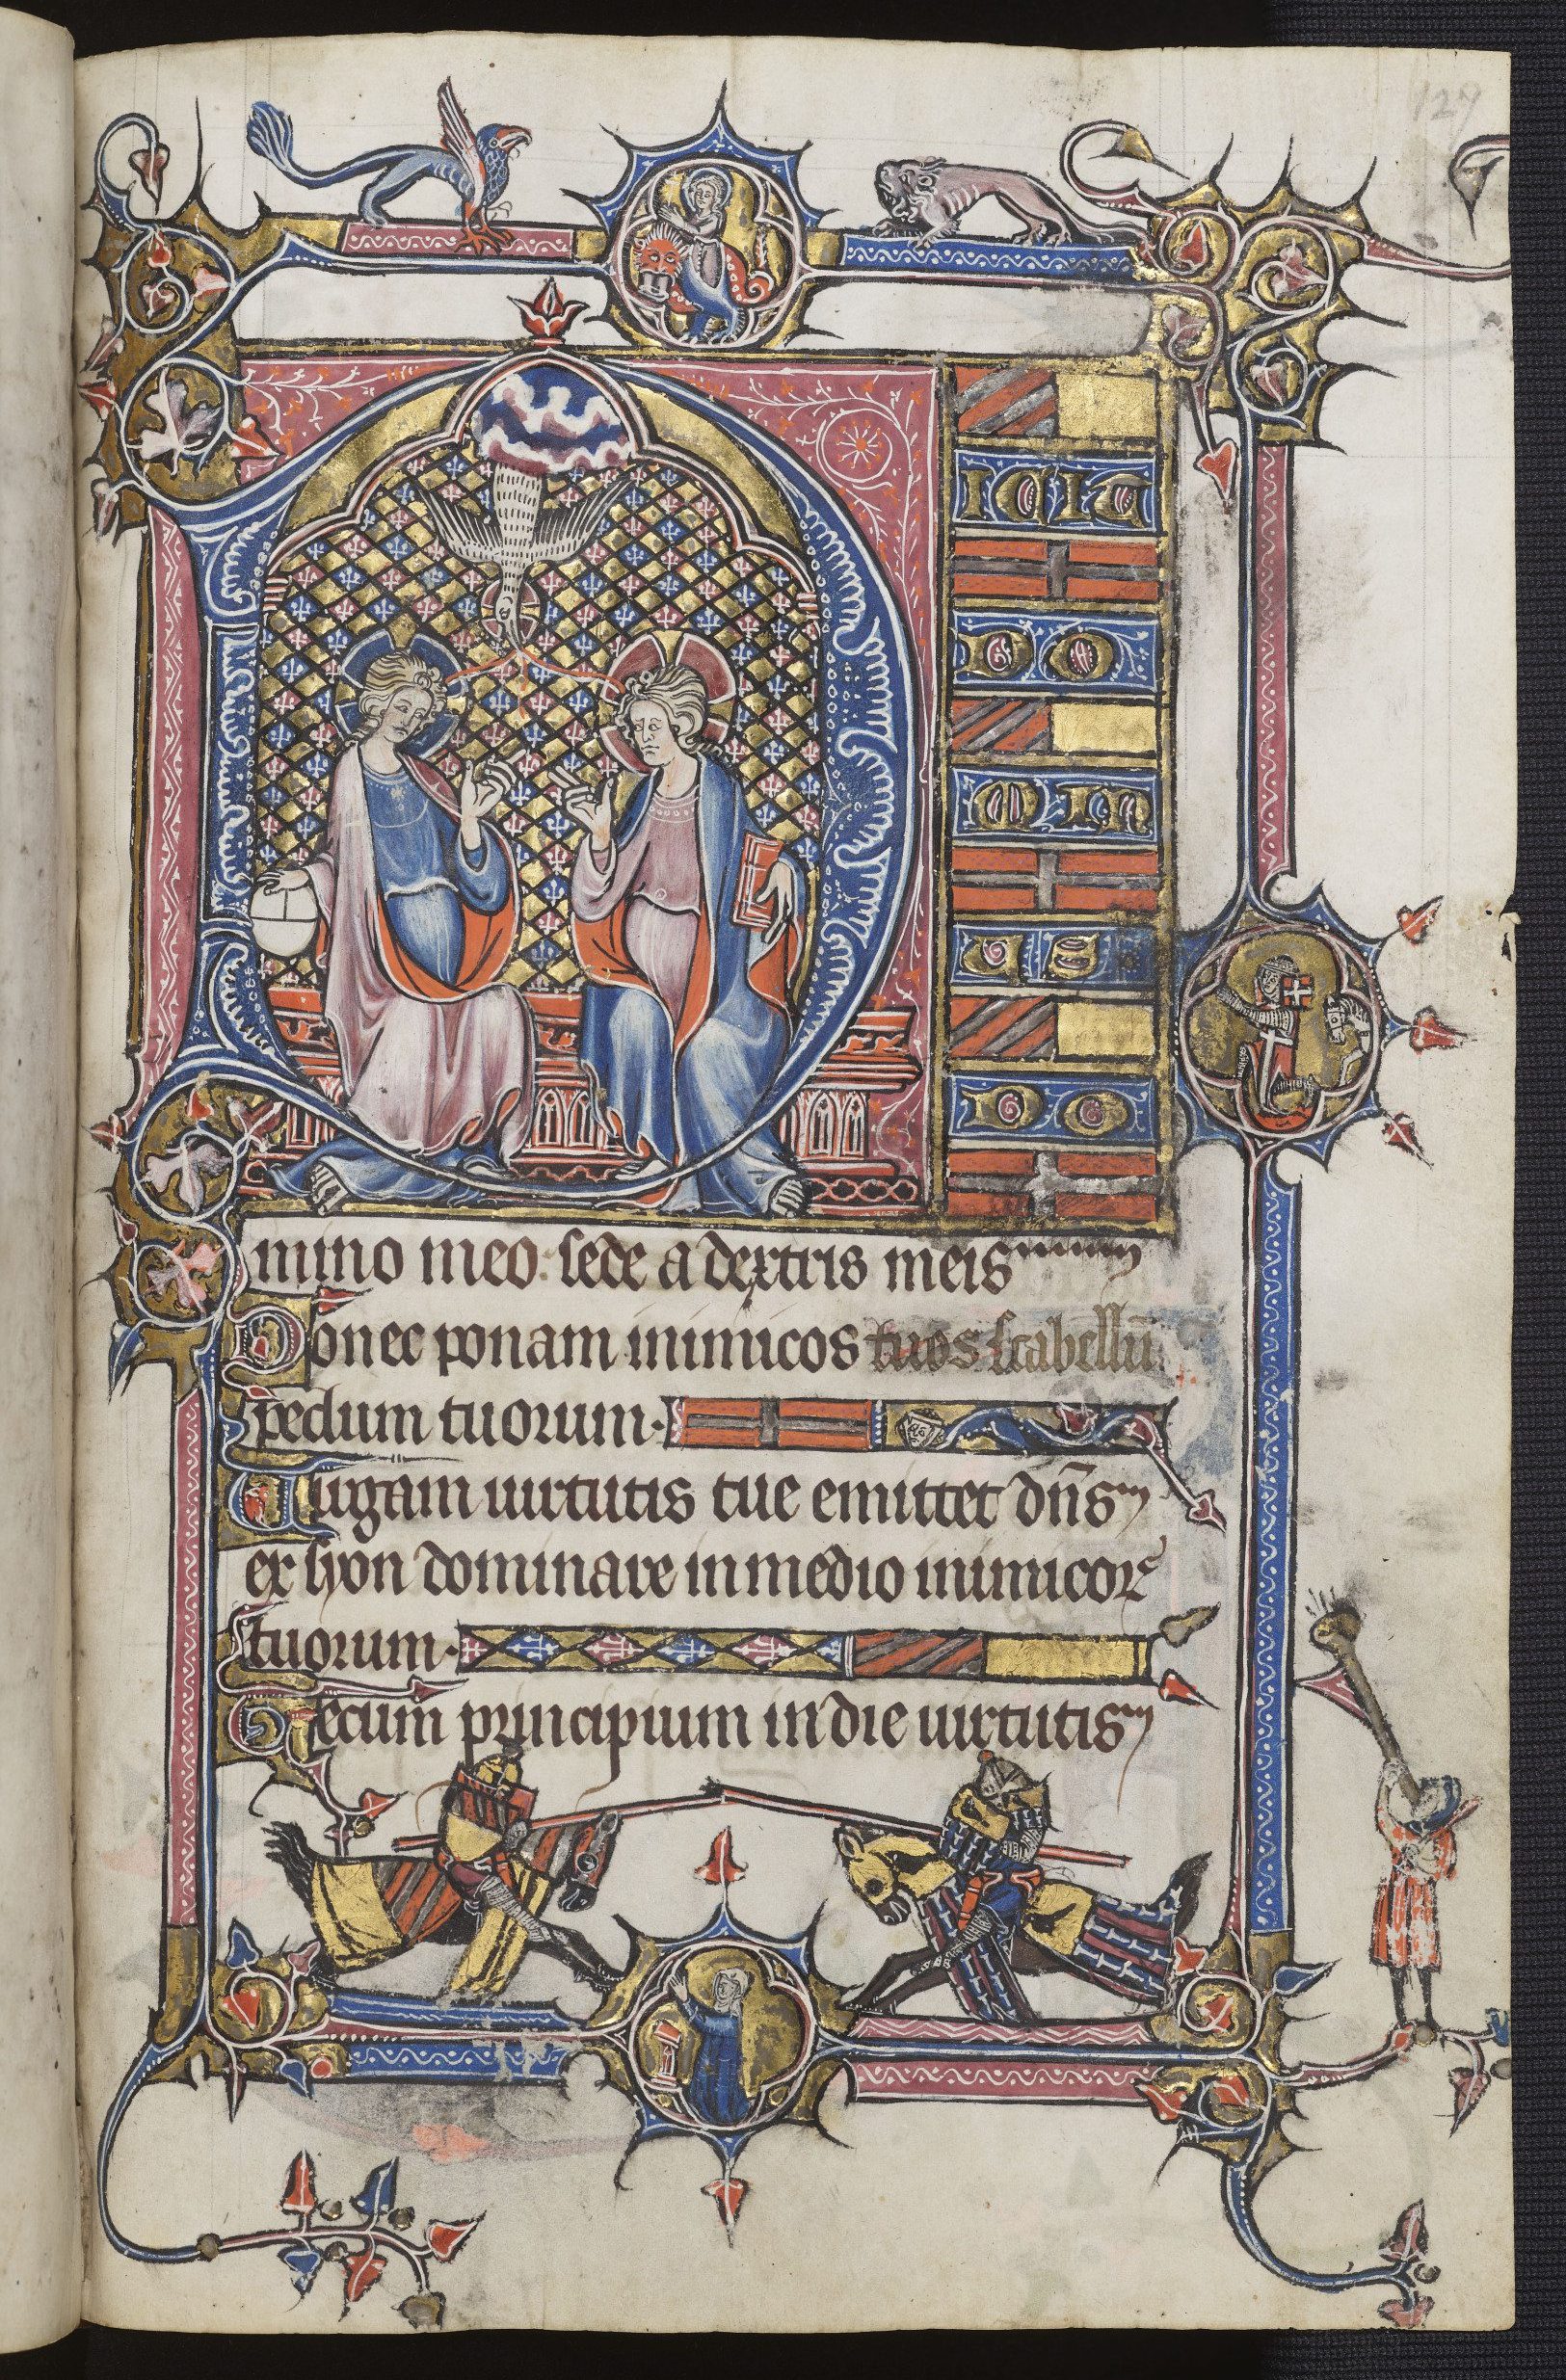 The Trinity and two knights jousting, with images of Saint Margaret, a knight (Joffroy d’Aspremont) and a laywoman (Isabelle de Kievraing) in prayer in the border medallions. Aspremont-Kievraing Prayer Book (psalter volume). Oxford, Bodleian Libraries MS Douce 118, fol. 127r.